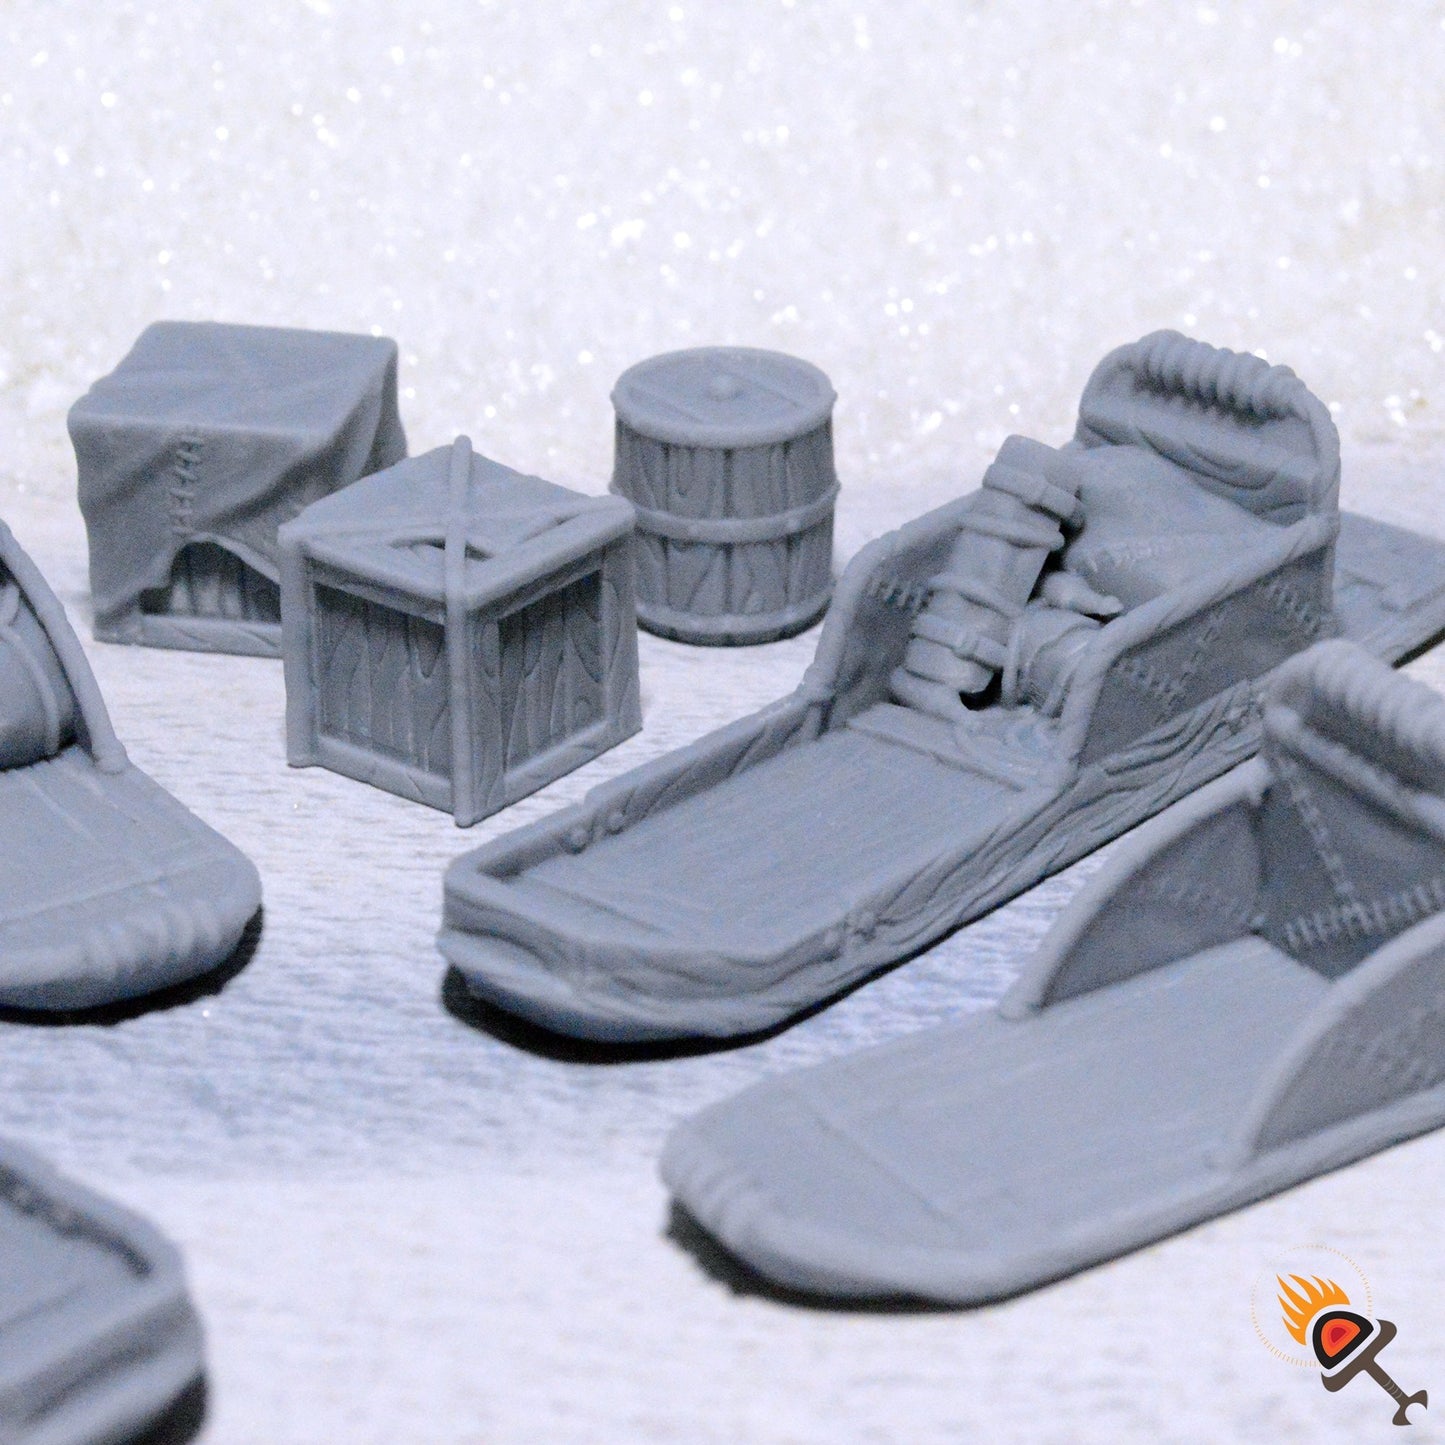 Miniature Dog Sleds and Cargo 15mm 28mm 32mm for D&D Icewind Dale Terrain, DnD Pathfinder Arctic Snowy Icy